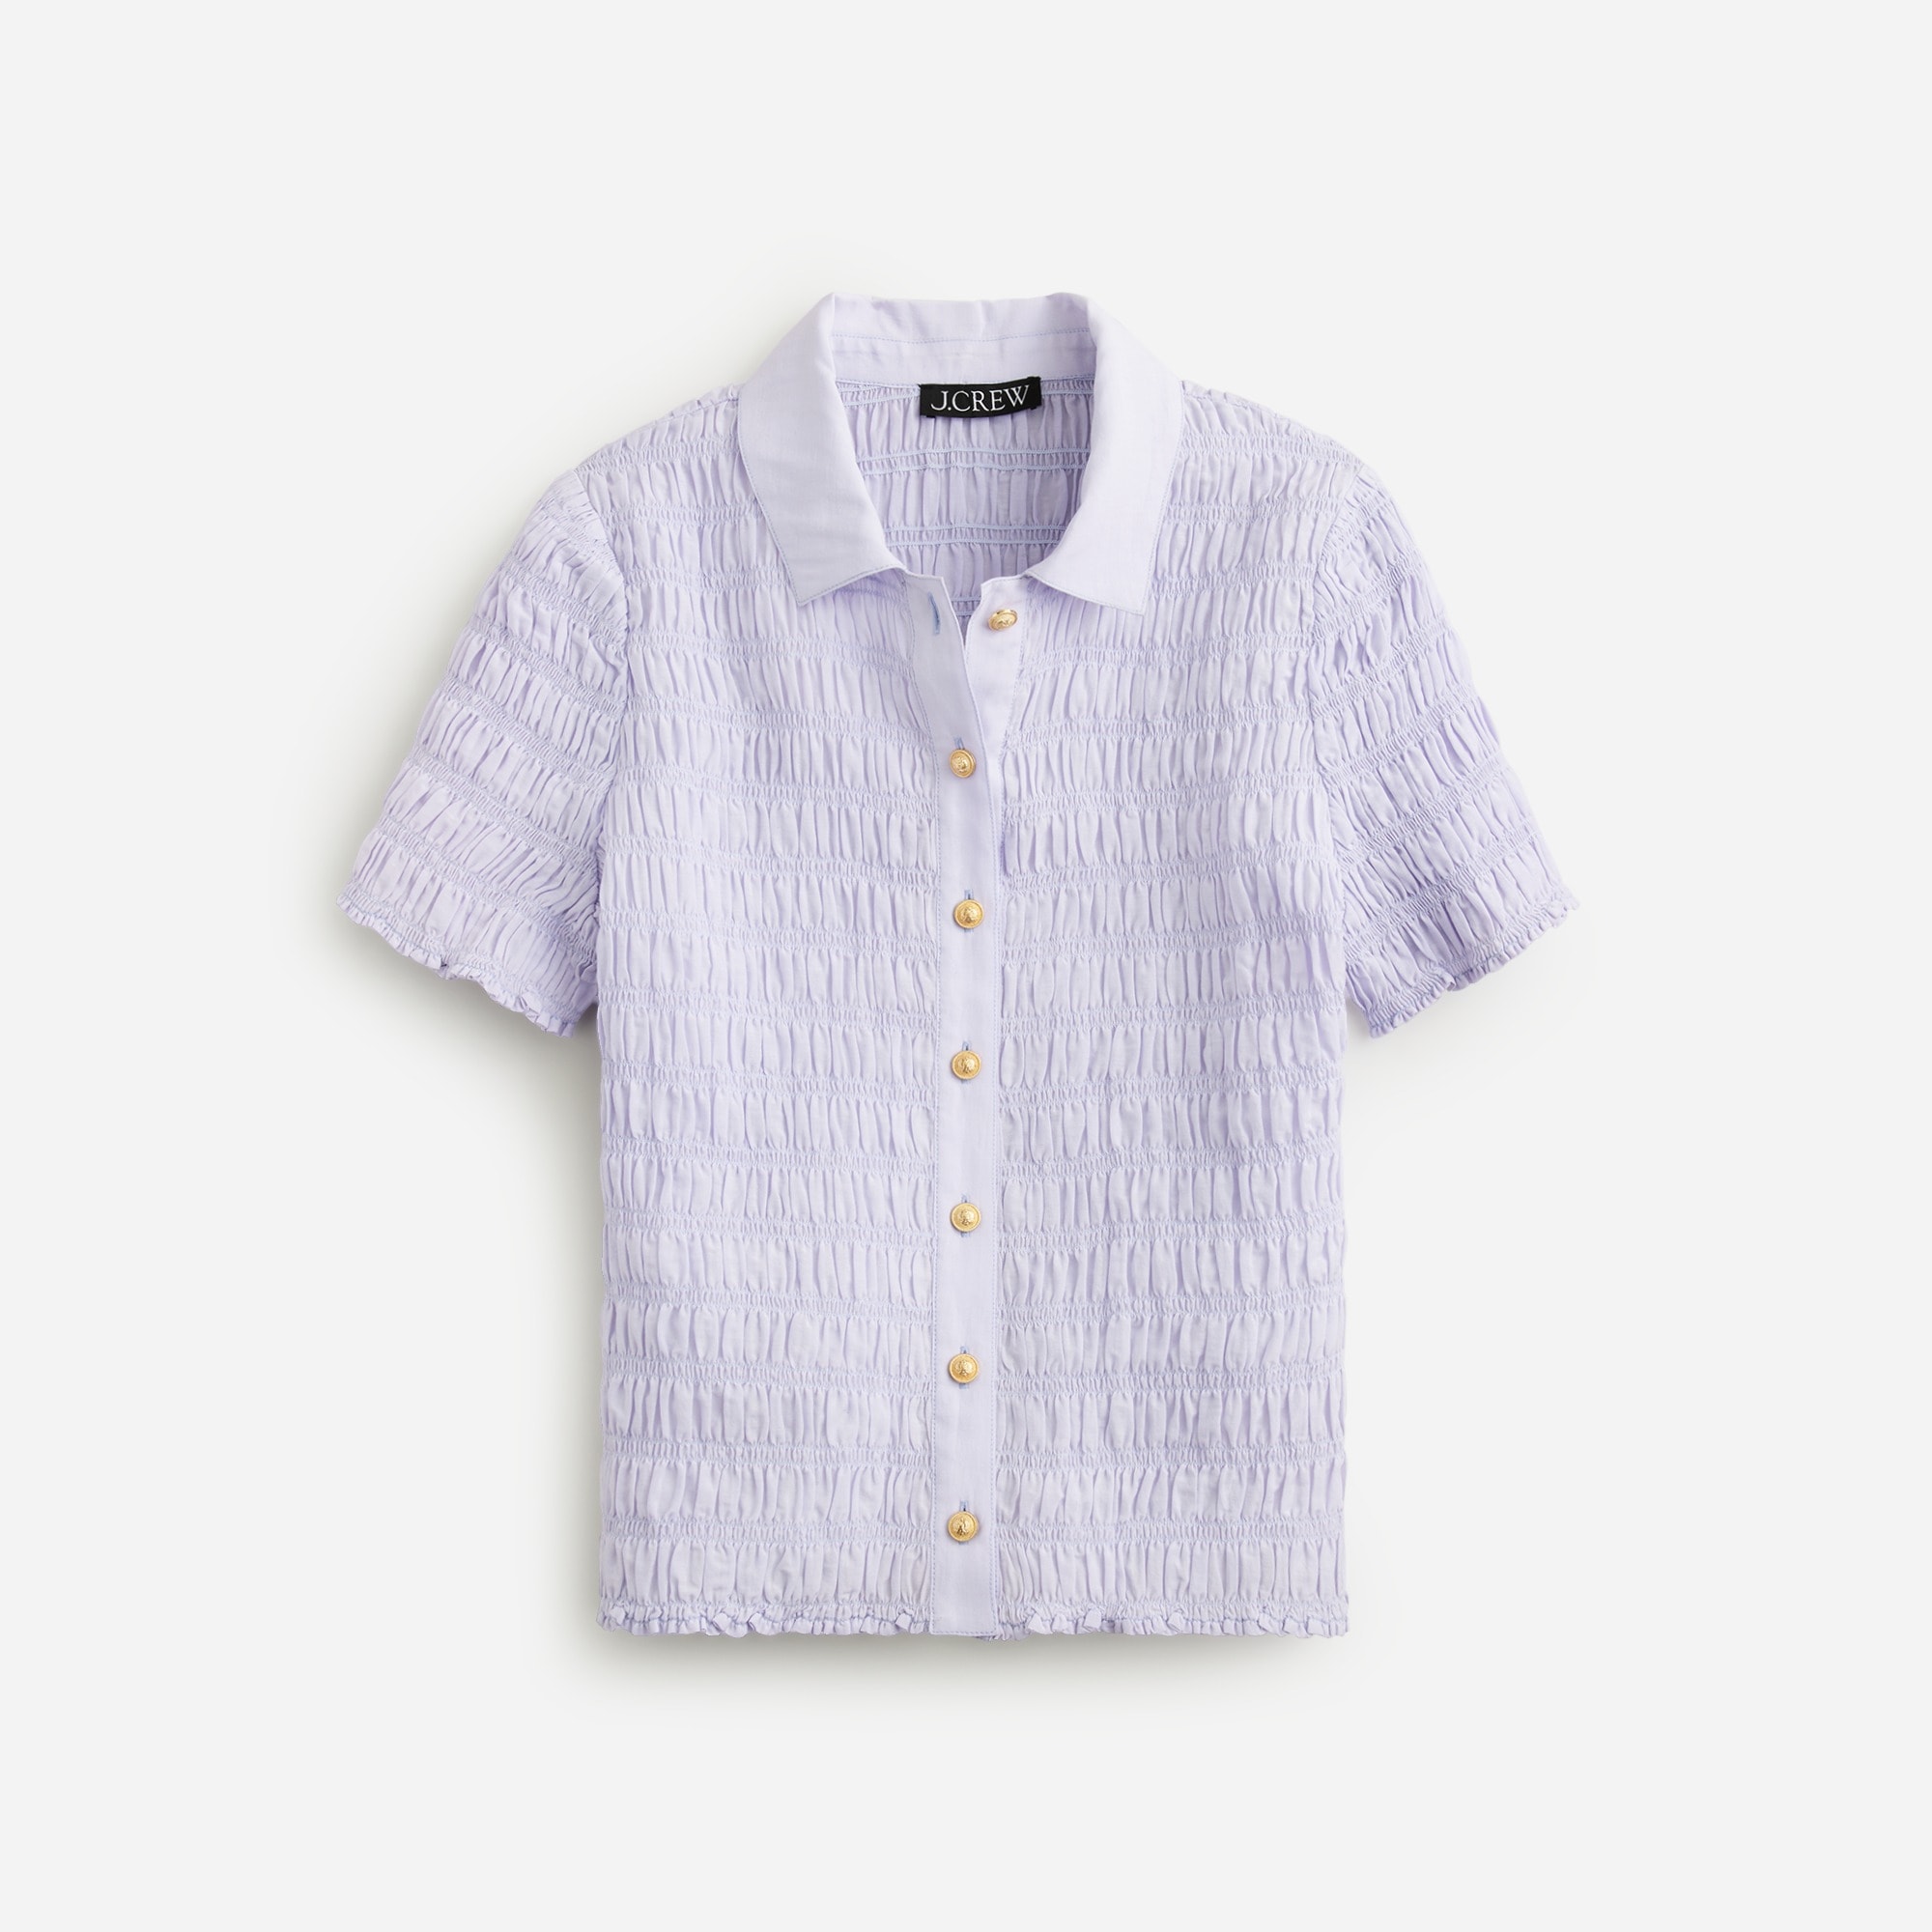  Smocked button-up shirt in cotton-blend voile